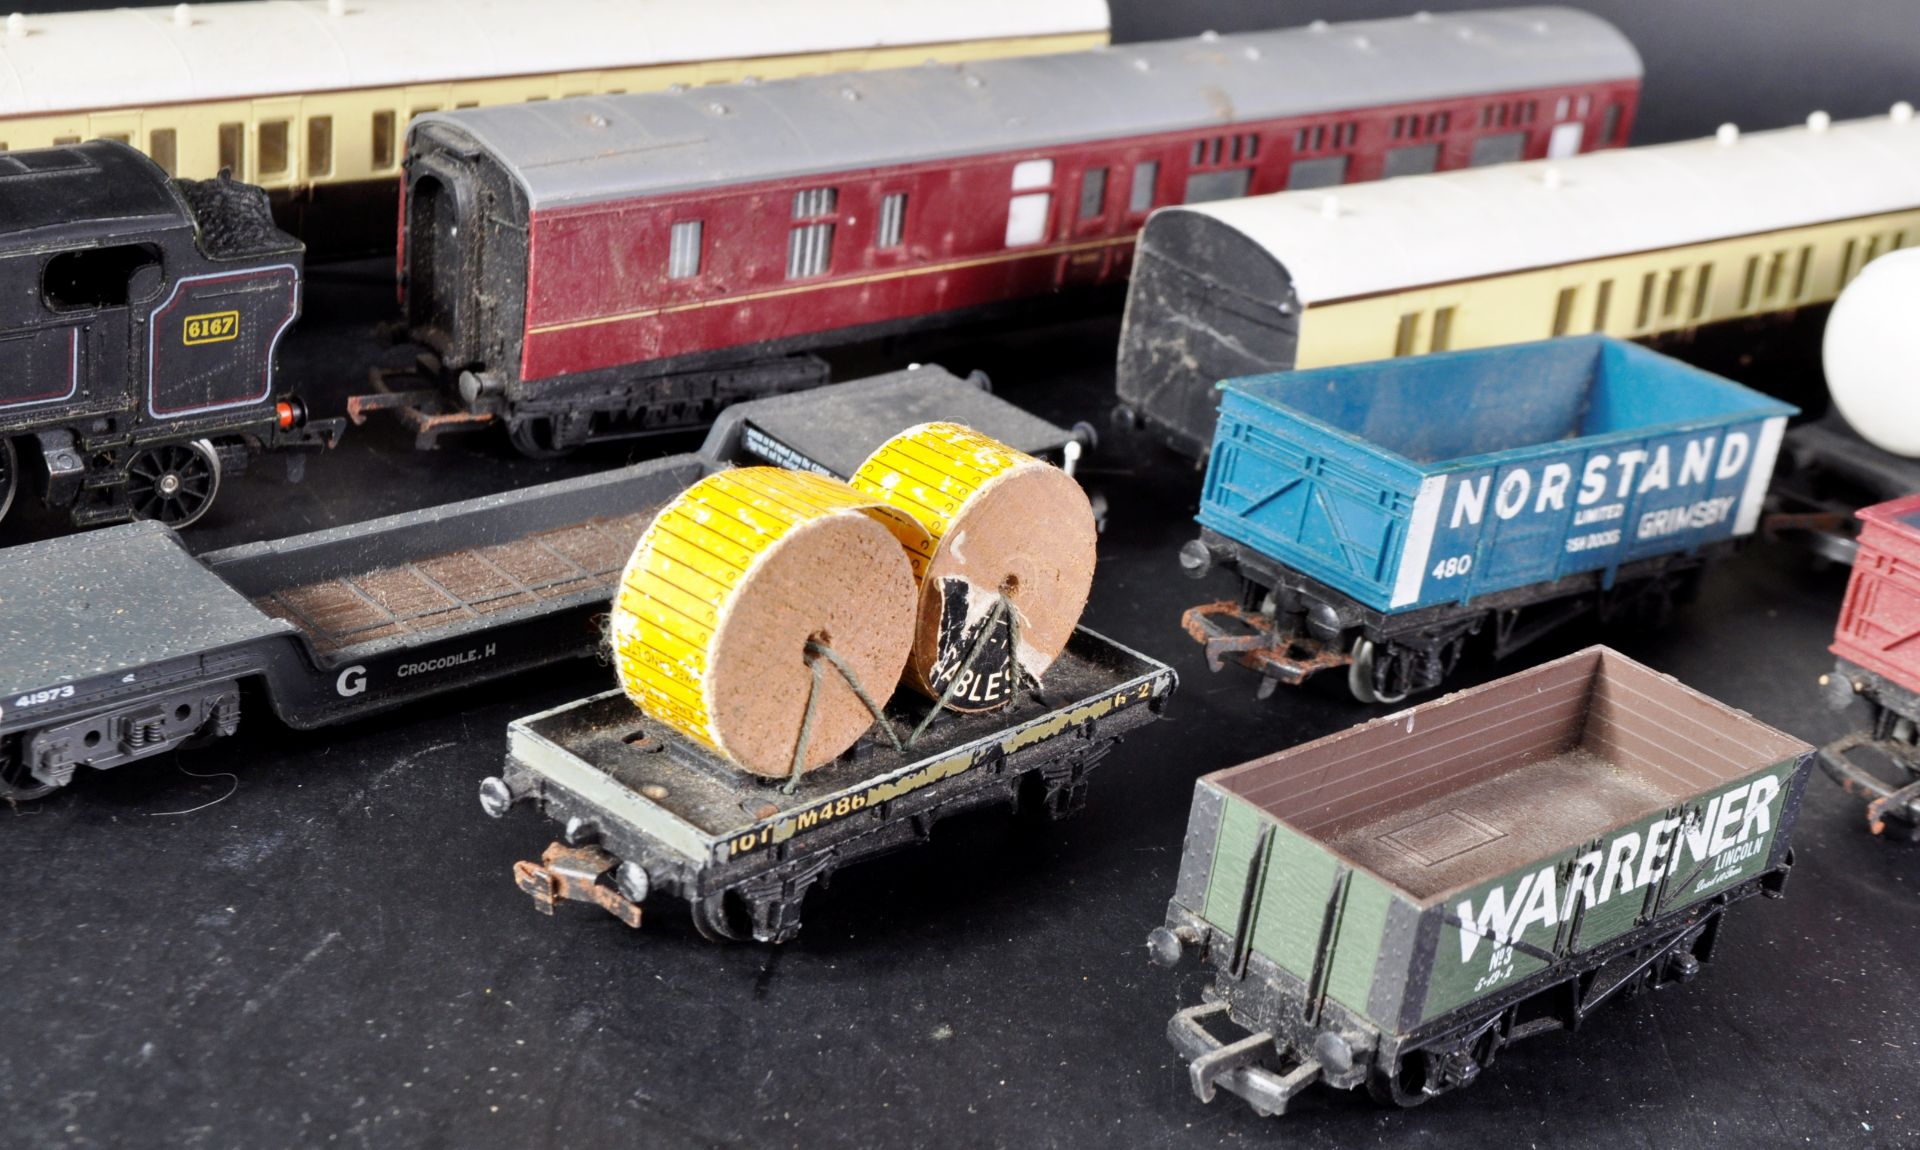 COLLECTION OF ASSORTED 00 GAUGE MODEL RAILWAY LOCO & CARRIAGES - Image 3 of 5